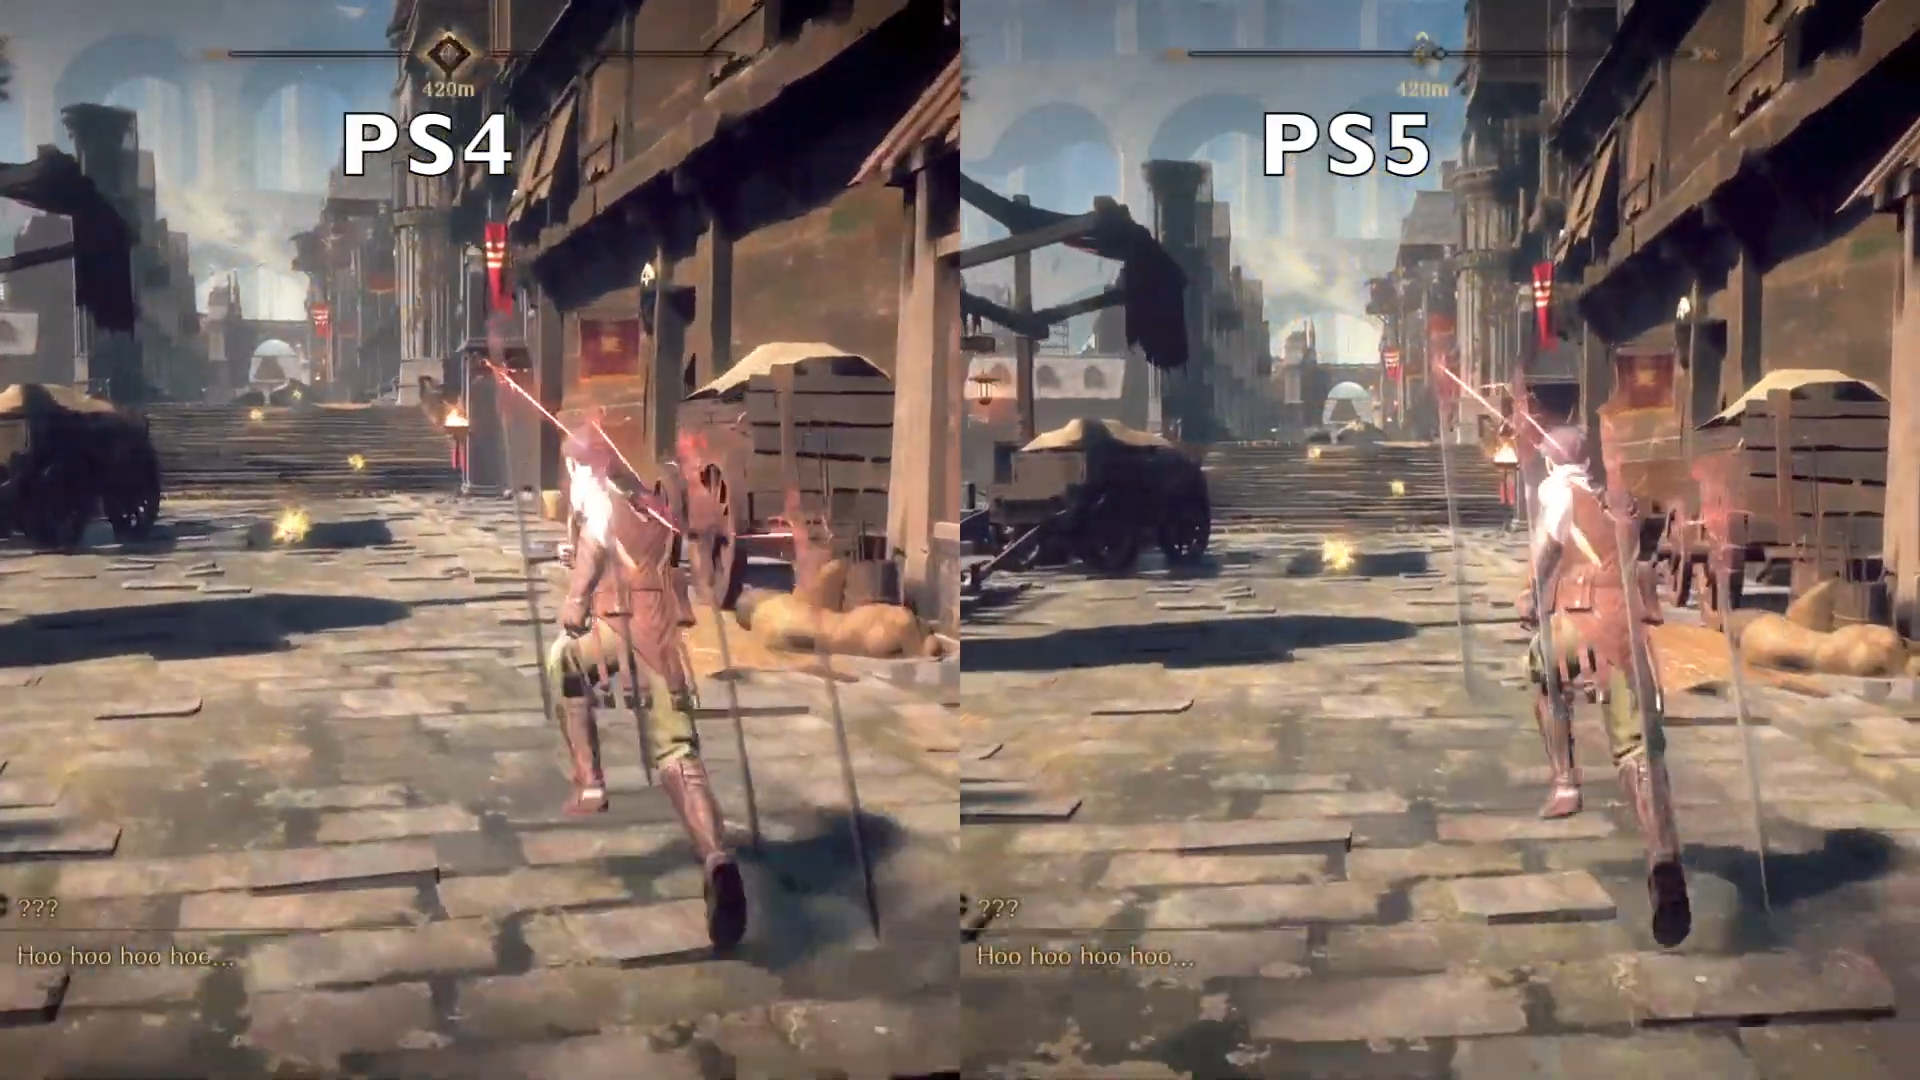 Babylon's Fall PS4 vs. PS5 Comparison: An Ugly Game On All Platforms